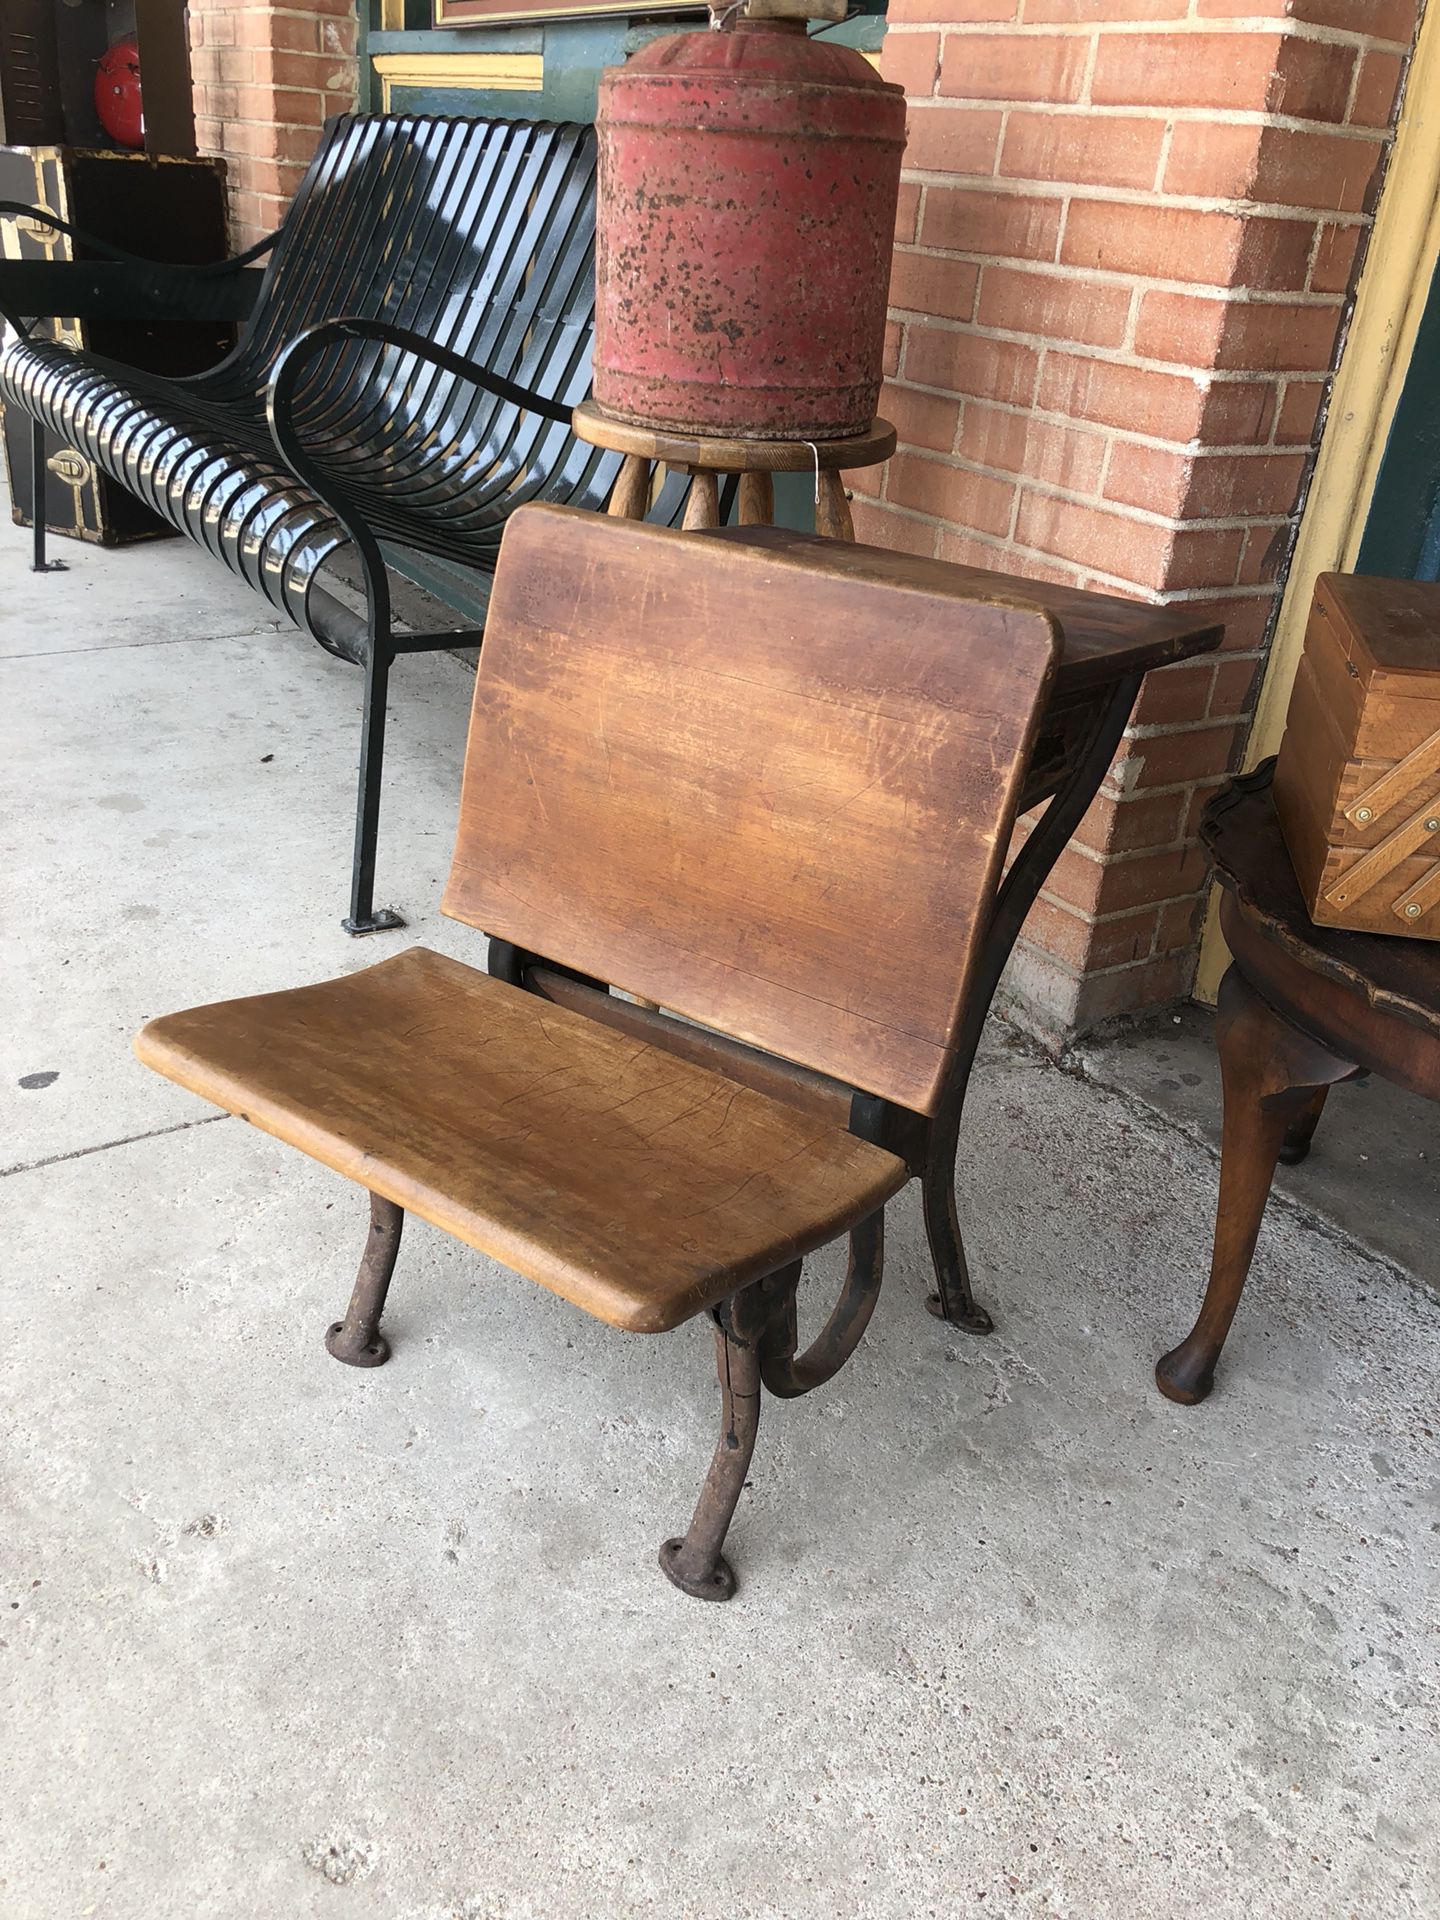 18x24x25 antique vintage early 1901 wood and metal child’s school desk. 75.00. 212 North Main Street. Buda. 😀Johanna. Furniture. Collectible spe